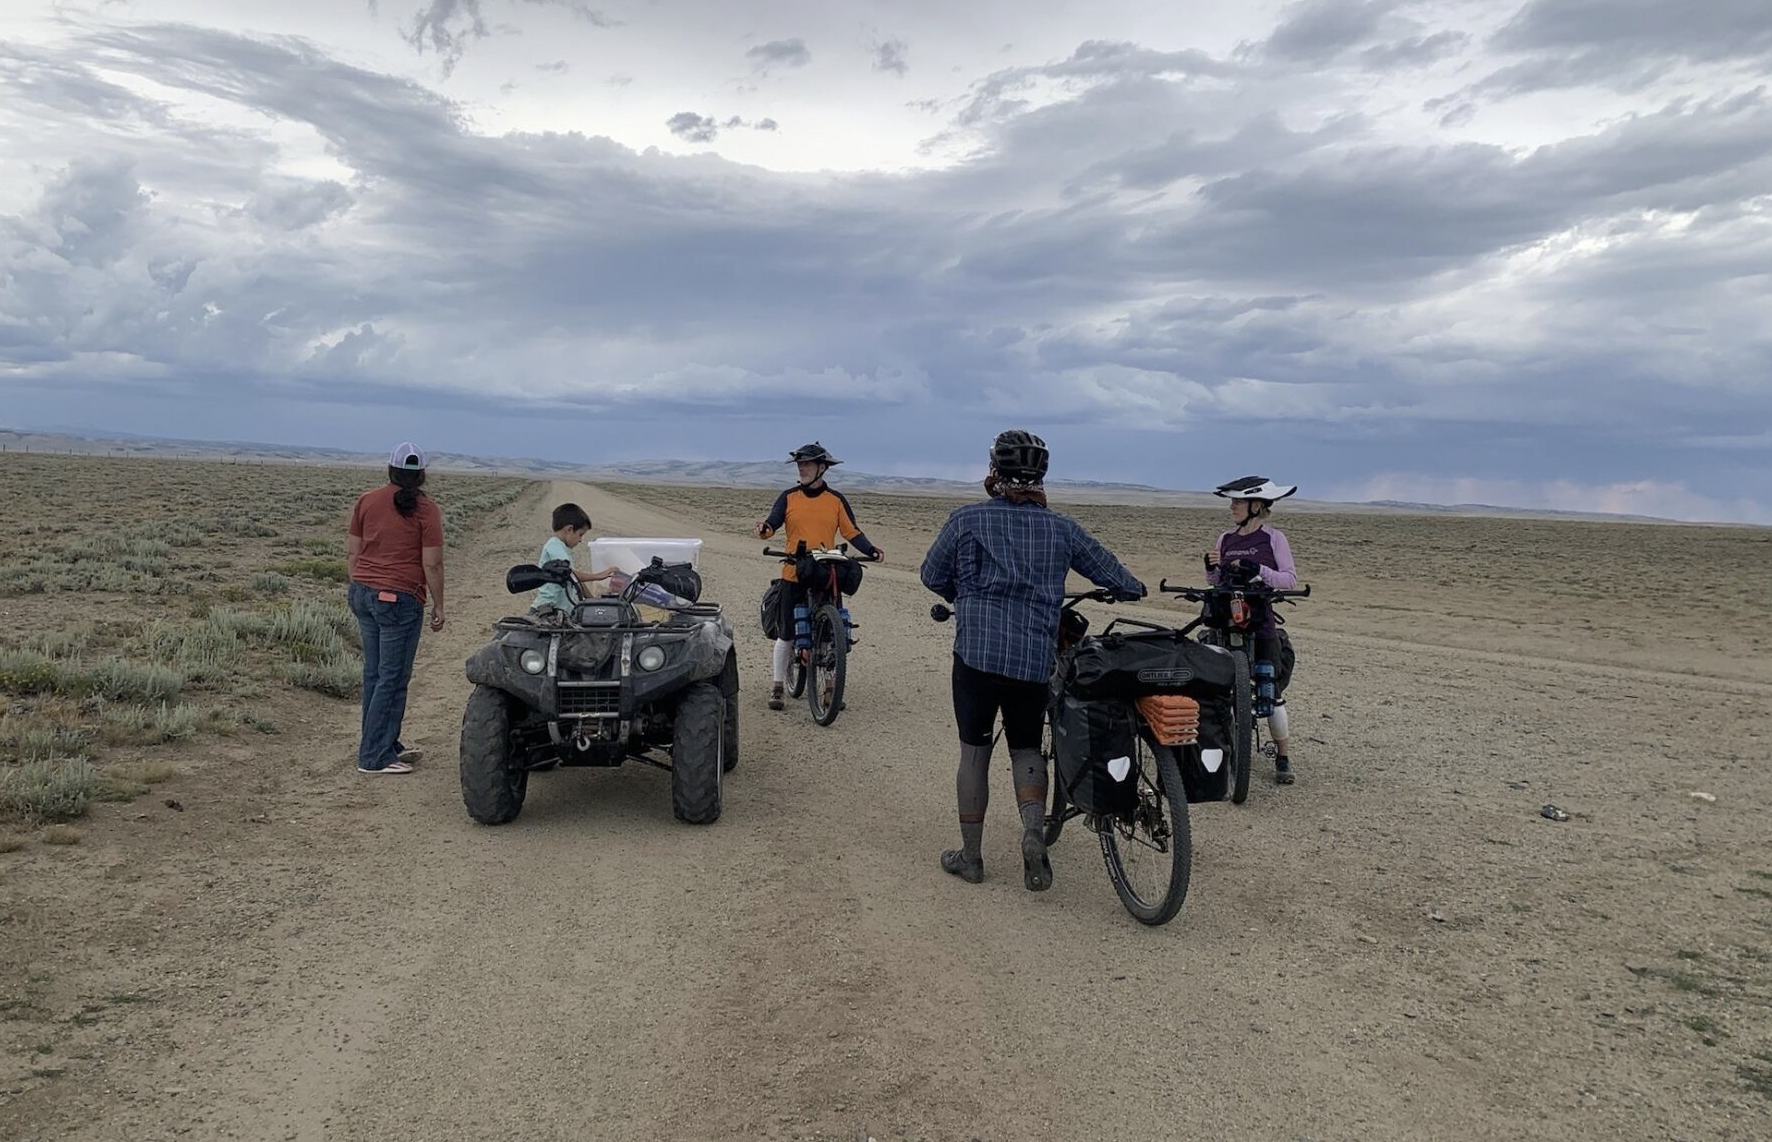 an ATV next to cyclists in a desert setting